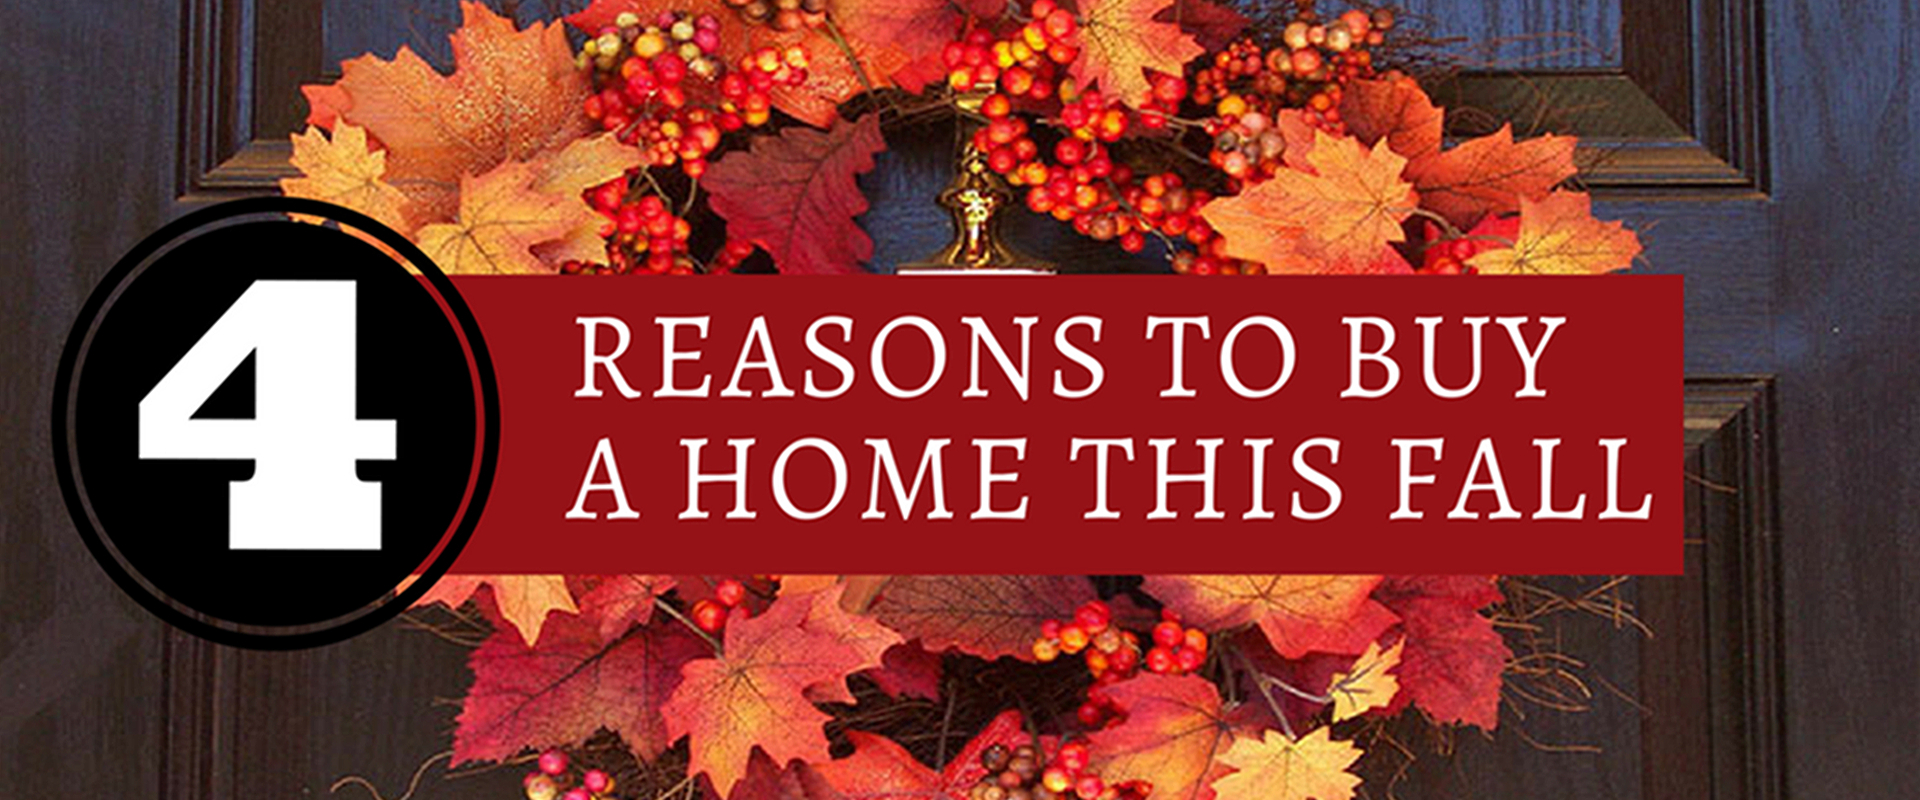 4 Reasons to Buy a Home in Washington DC, Virginia, or Maryland this Fall!